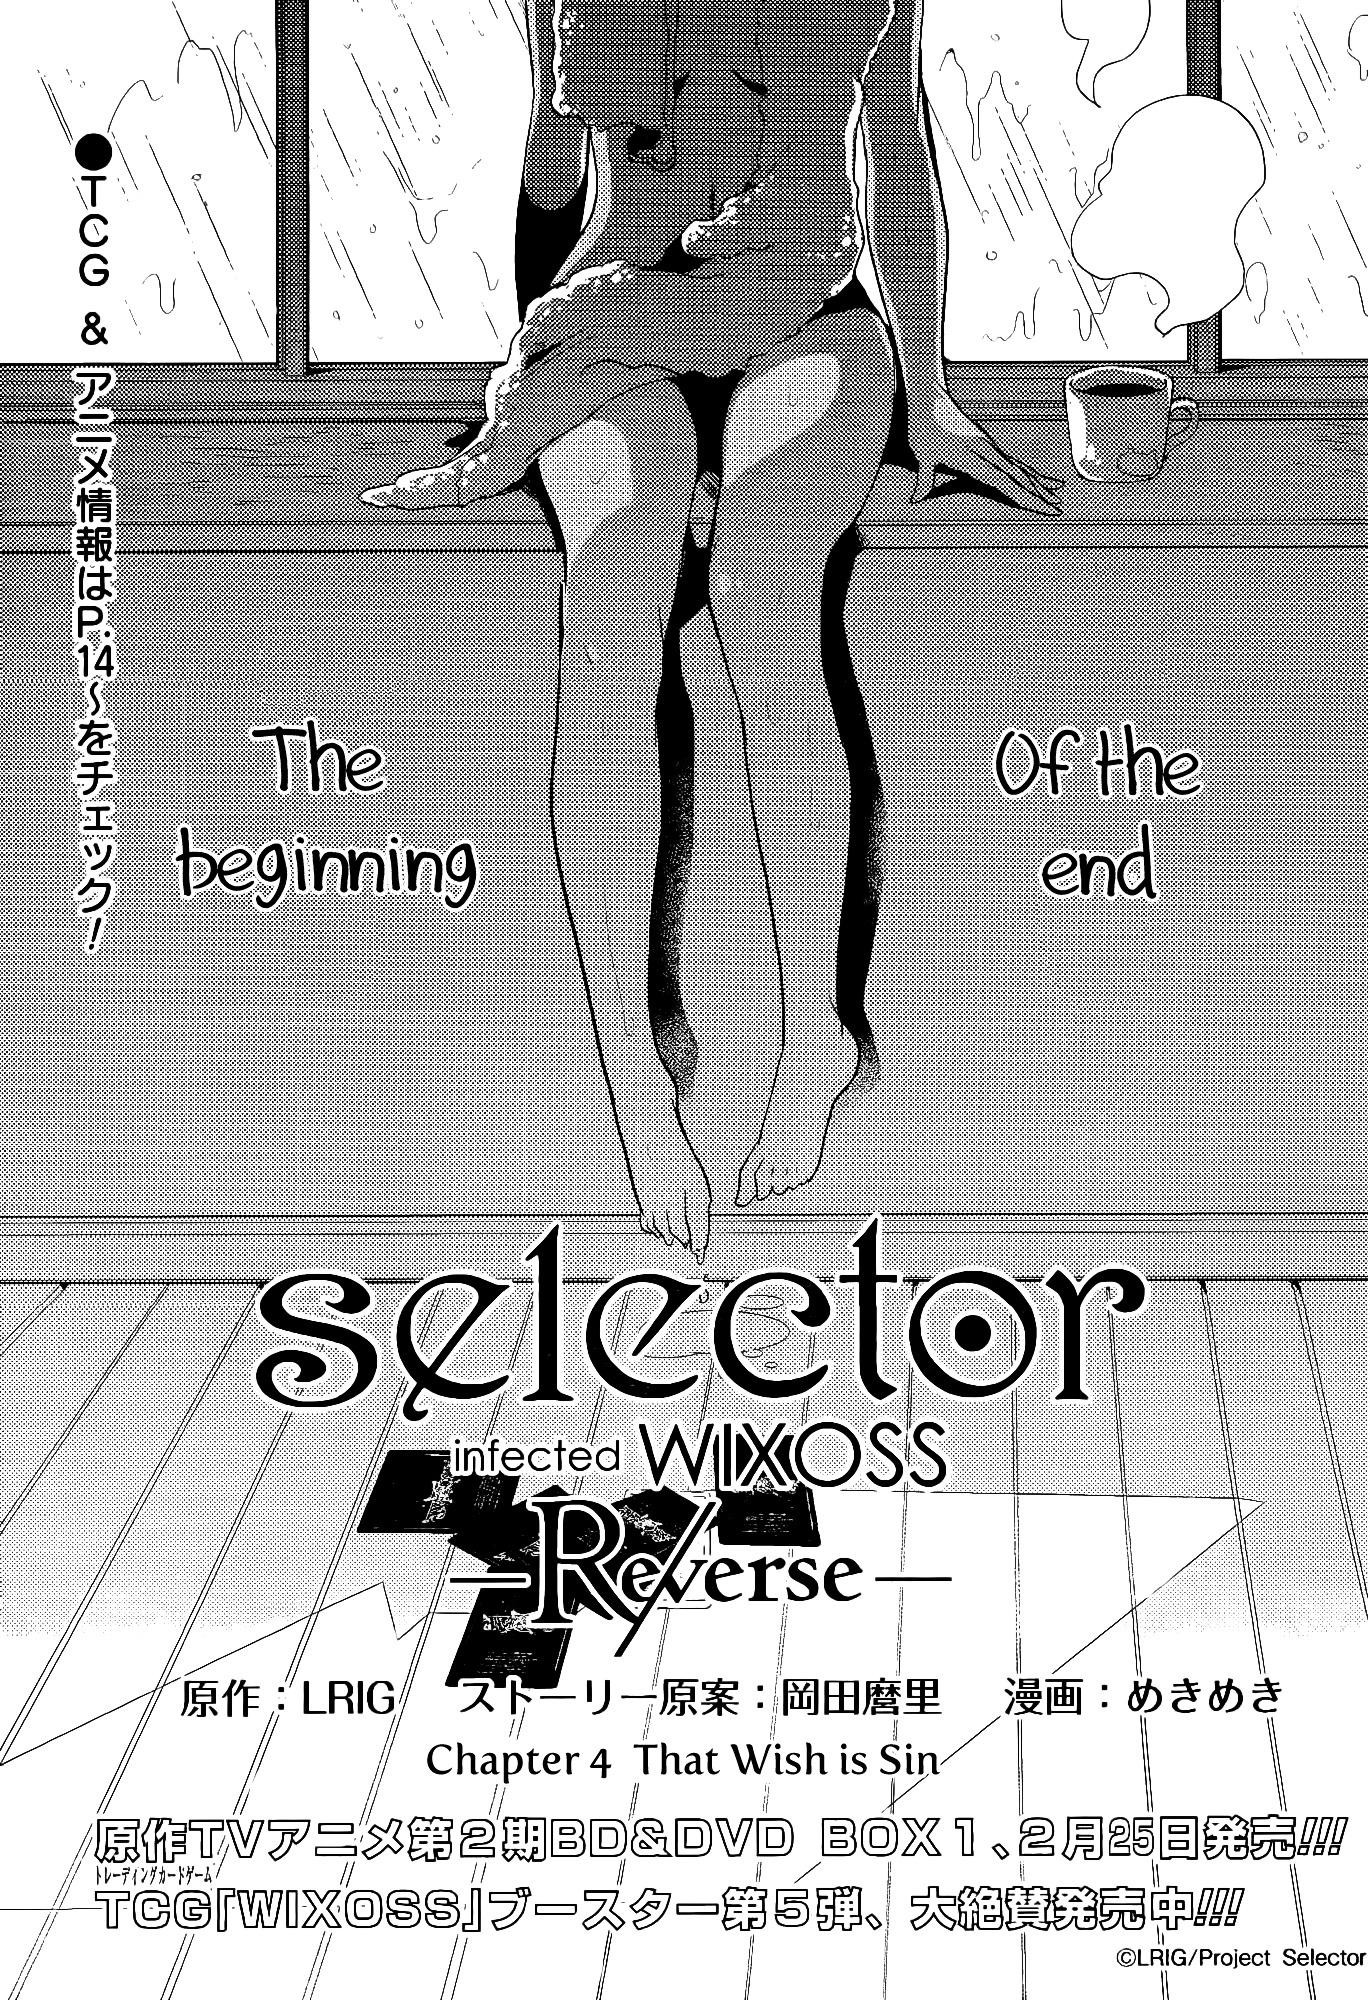 Selector Infected Wixoss - Re/verse - Chapter 4 #2